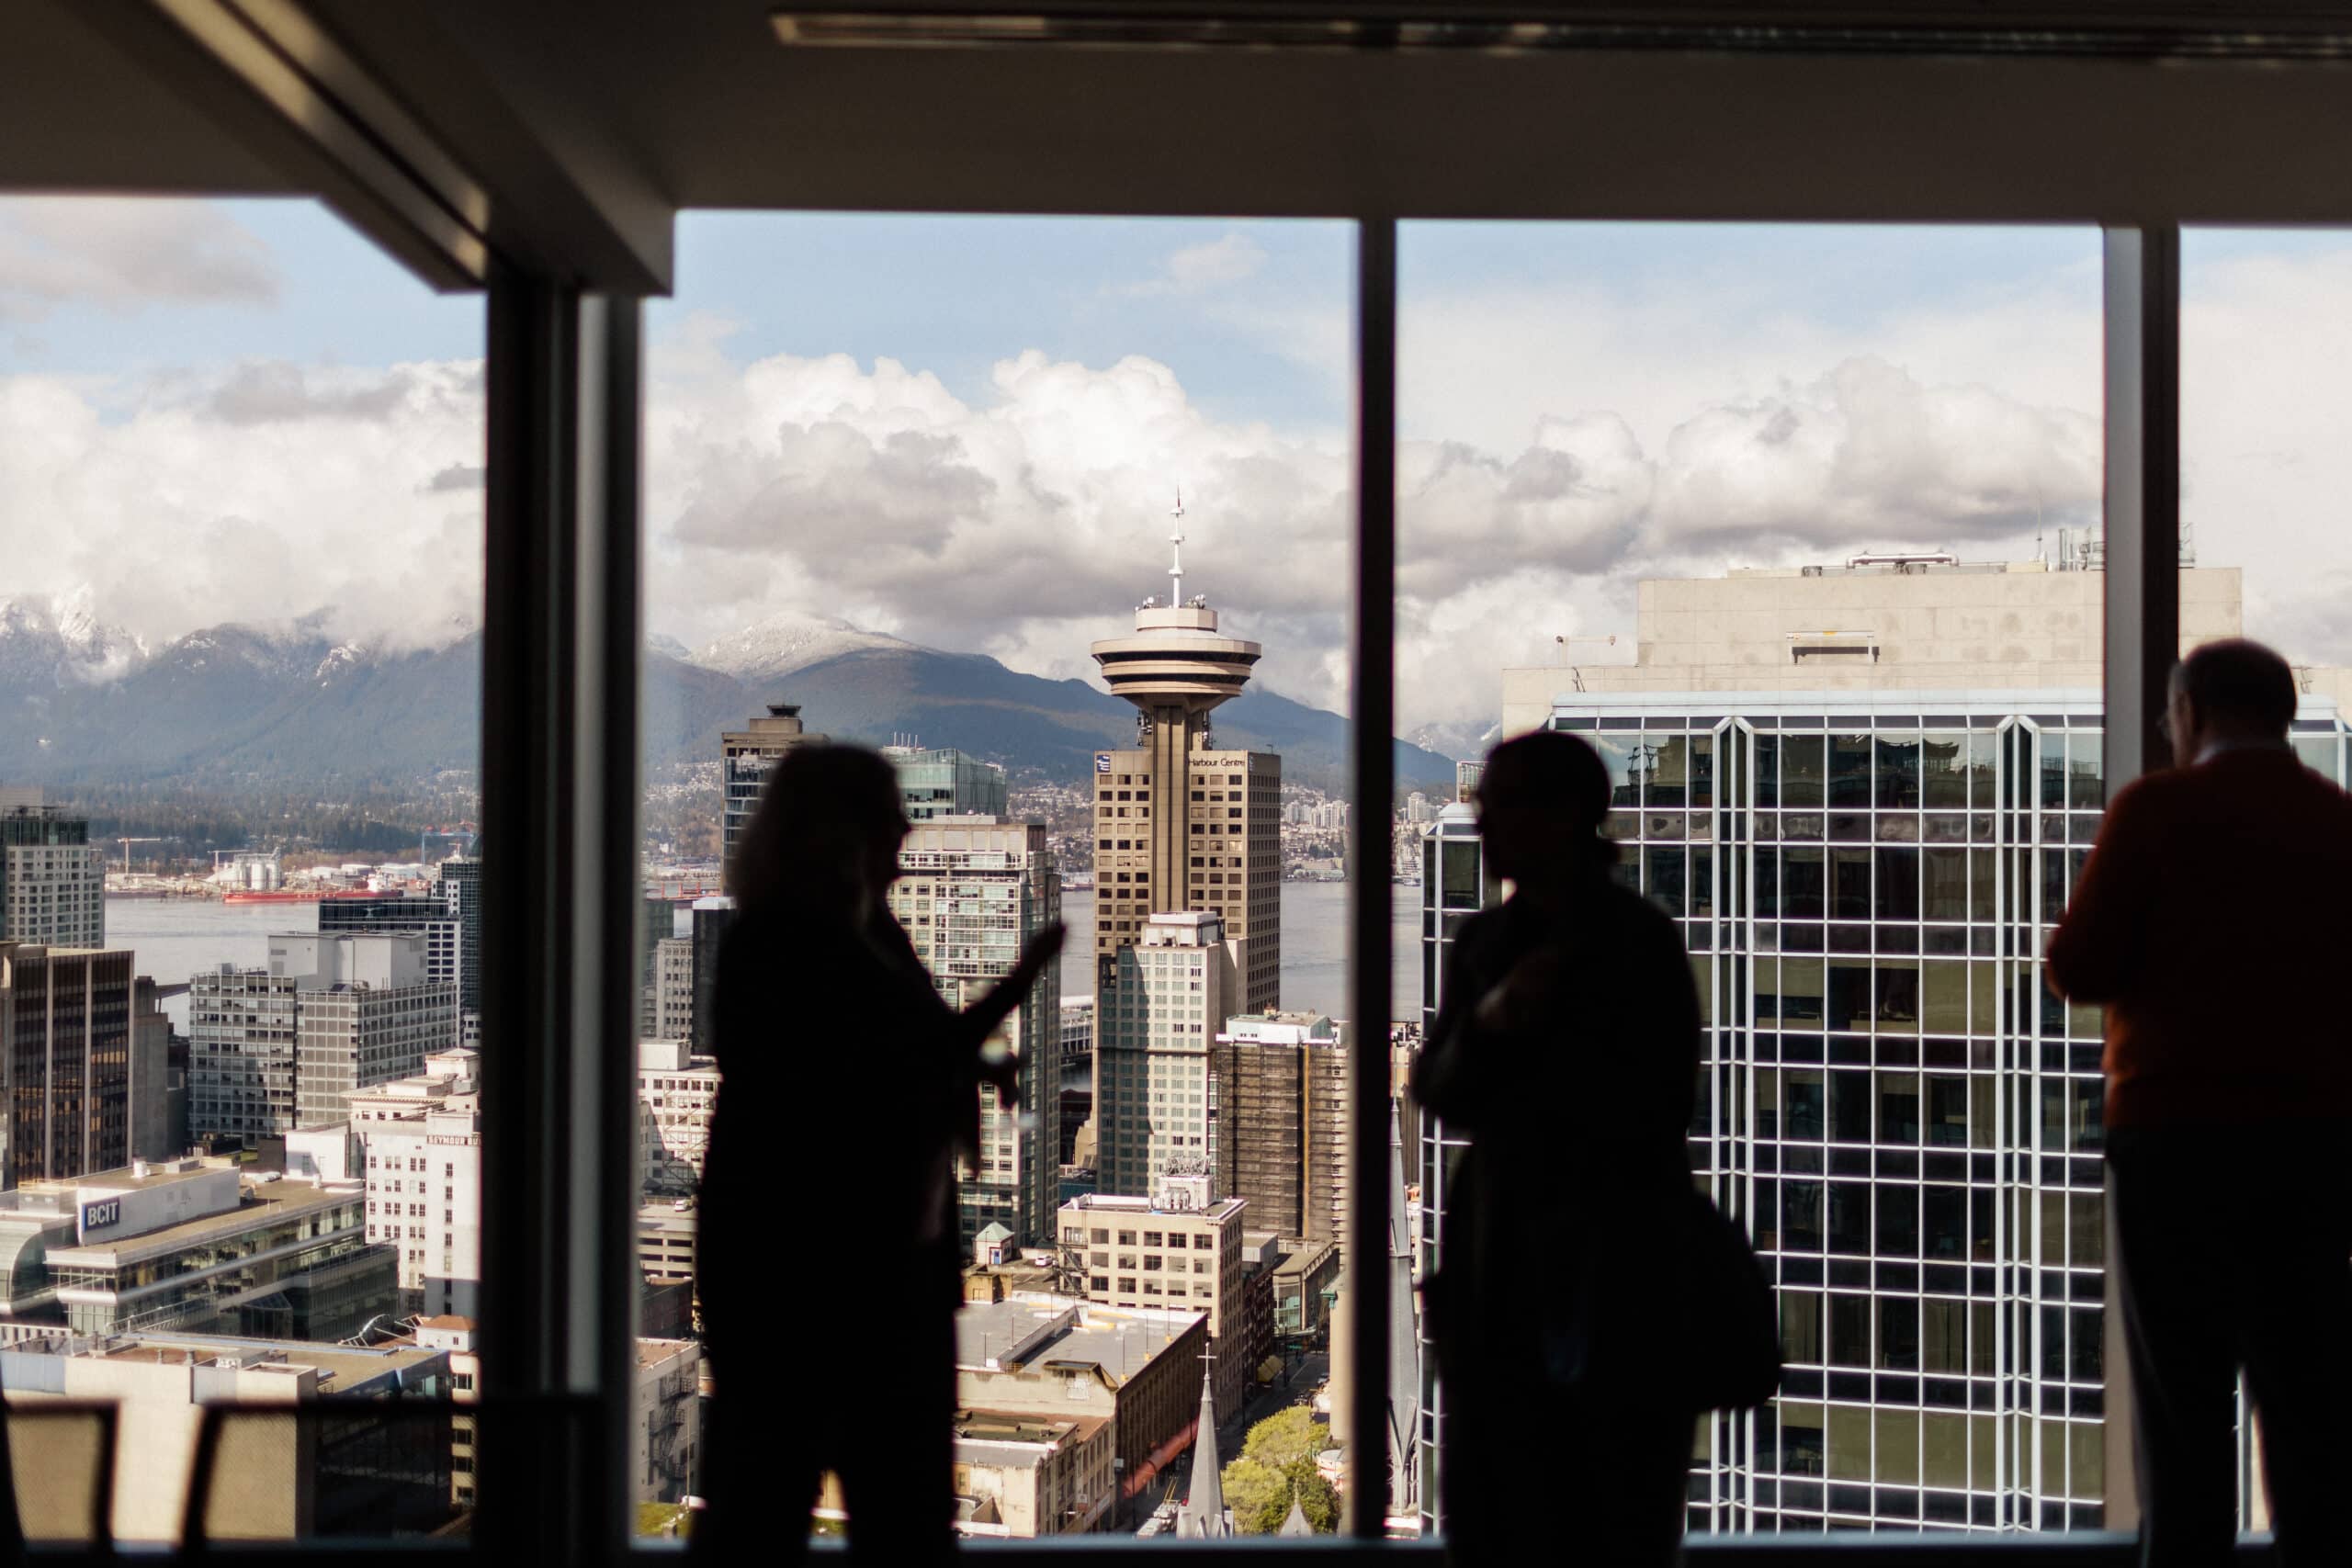 Silhouette of people standing in front of a window looking out at a view of downtown Vancouver skyline.